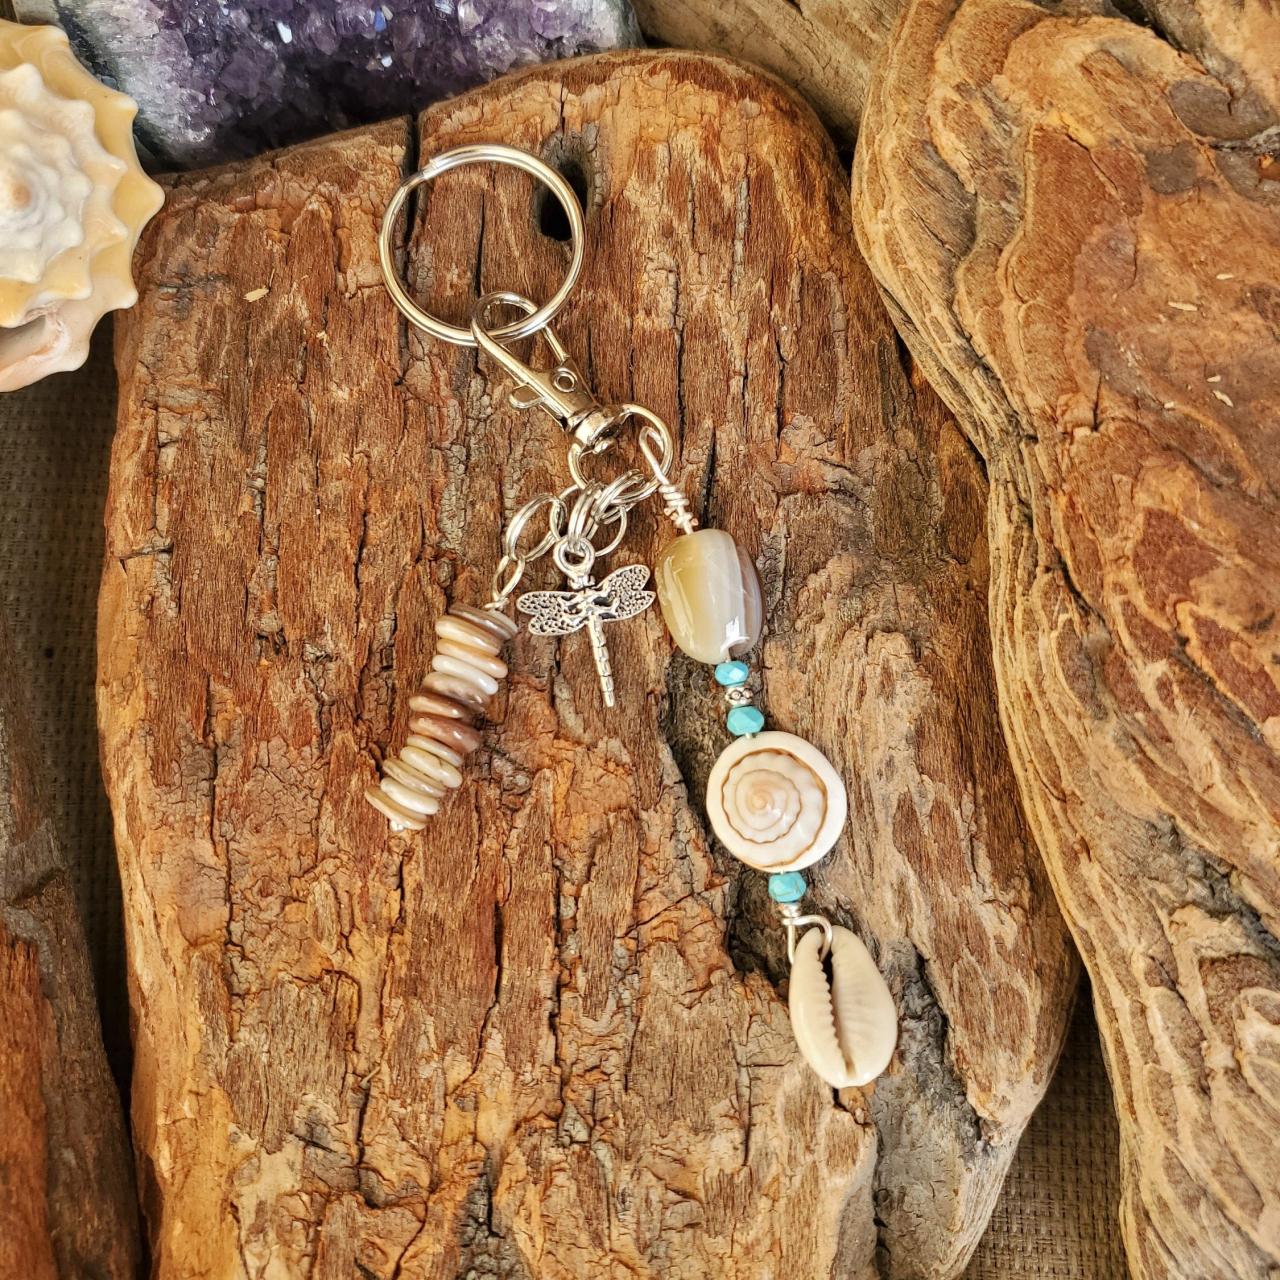 Botswana Agate Stone And Turquoise With Abalone Discs And Sea Shells, With Dragonfly Charm Keychain